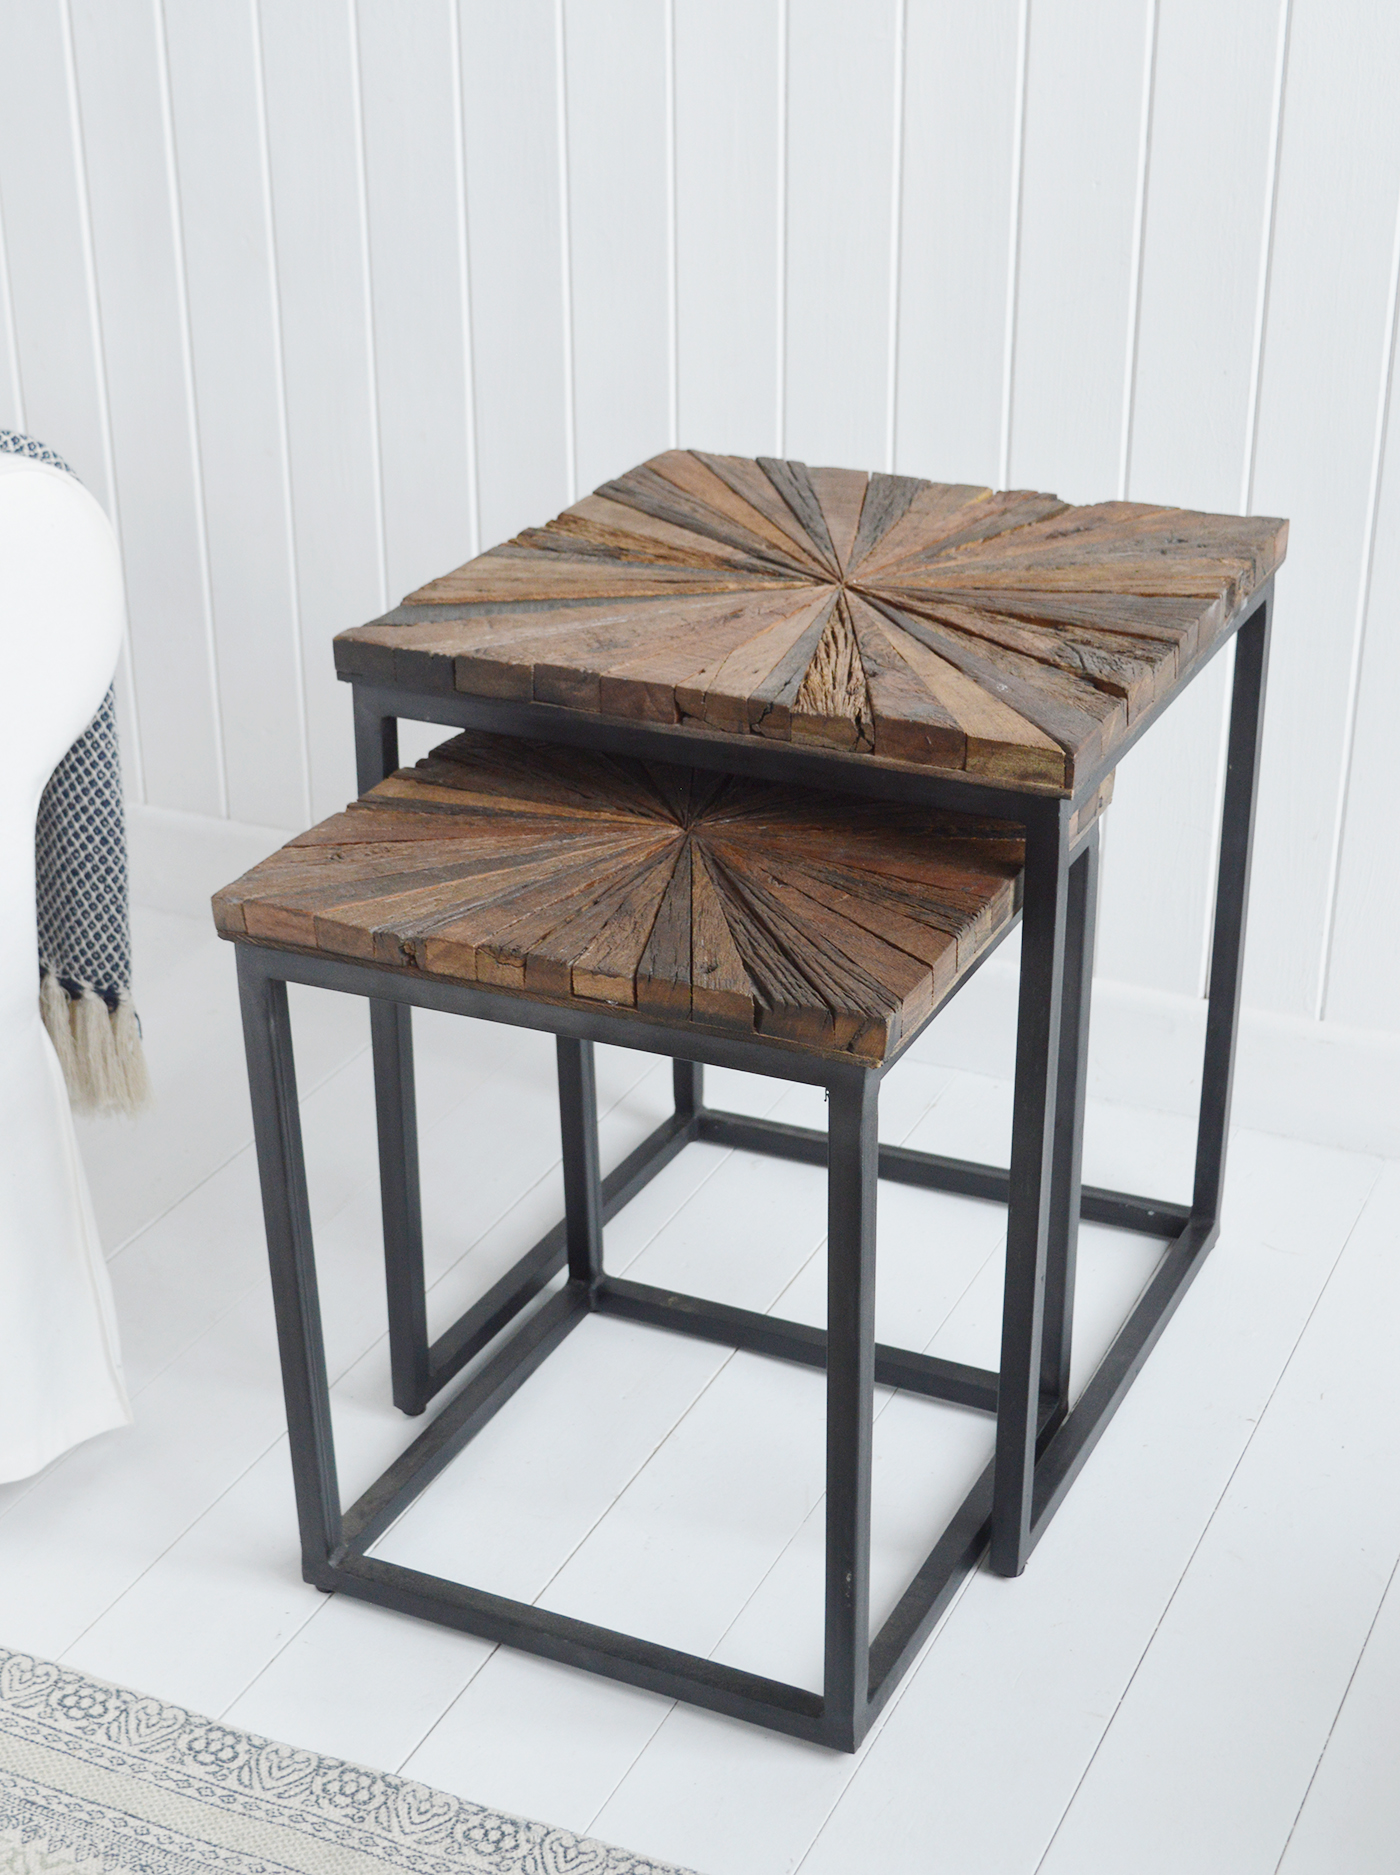 Woodstock Nest of Square Tables - New England Coastal and Modern Farmhouse furniture